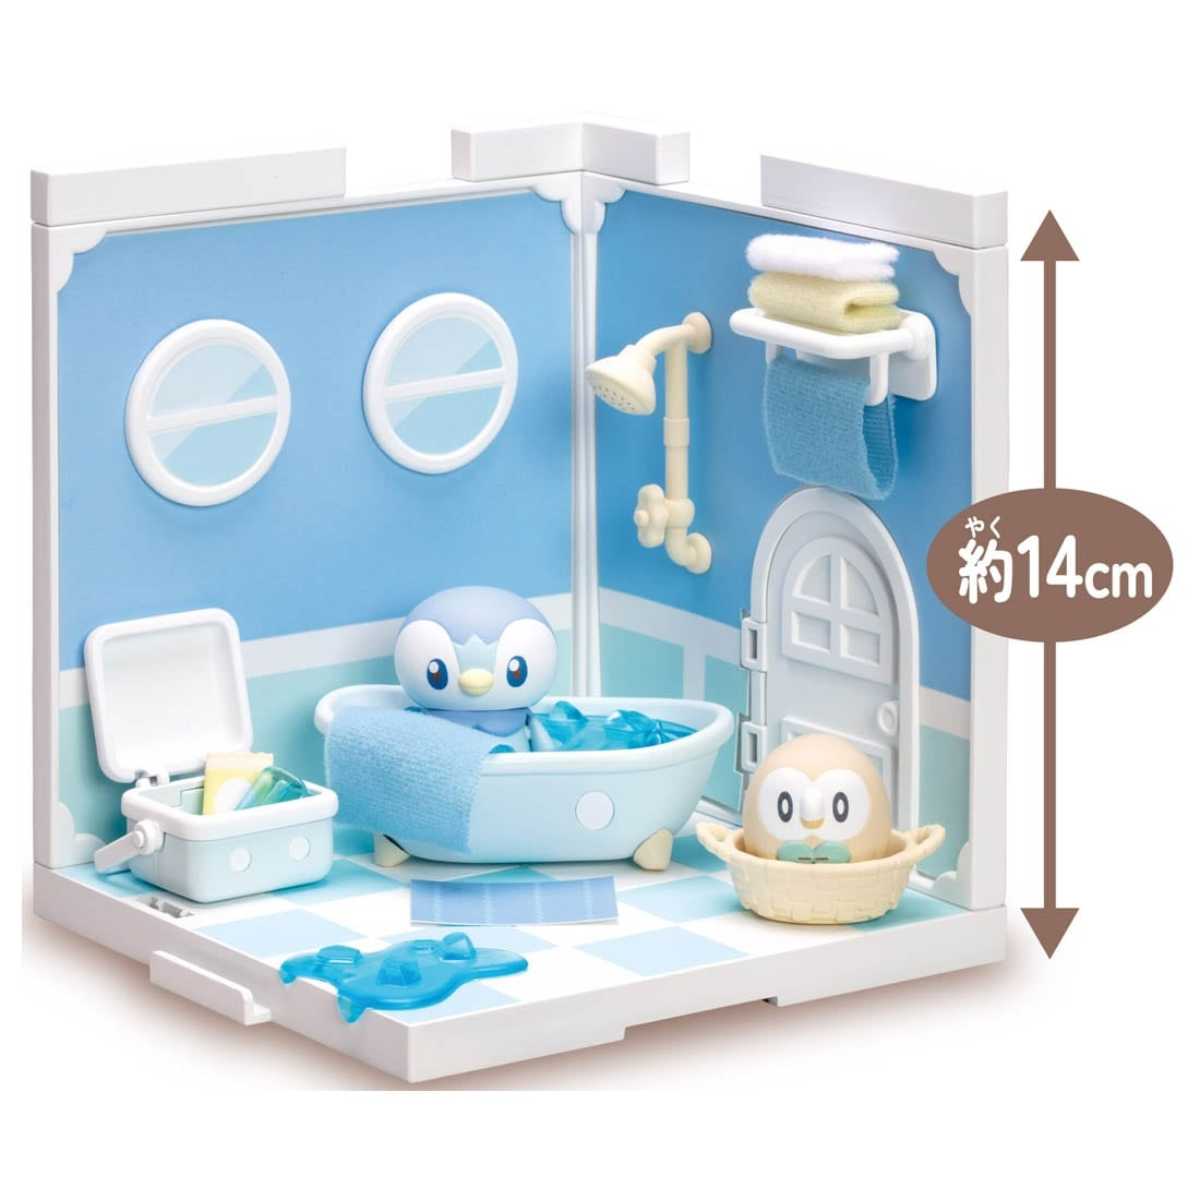 Pokemon Pokepeace House Bathroom "Piplup & Rowlet"-Takara Tomy-Ace Cards & Collectibles